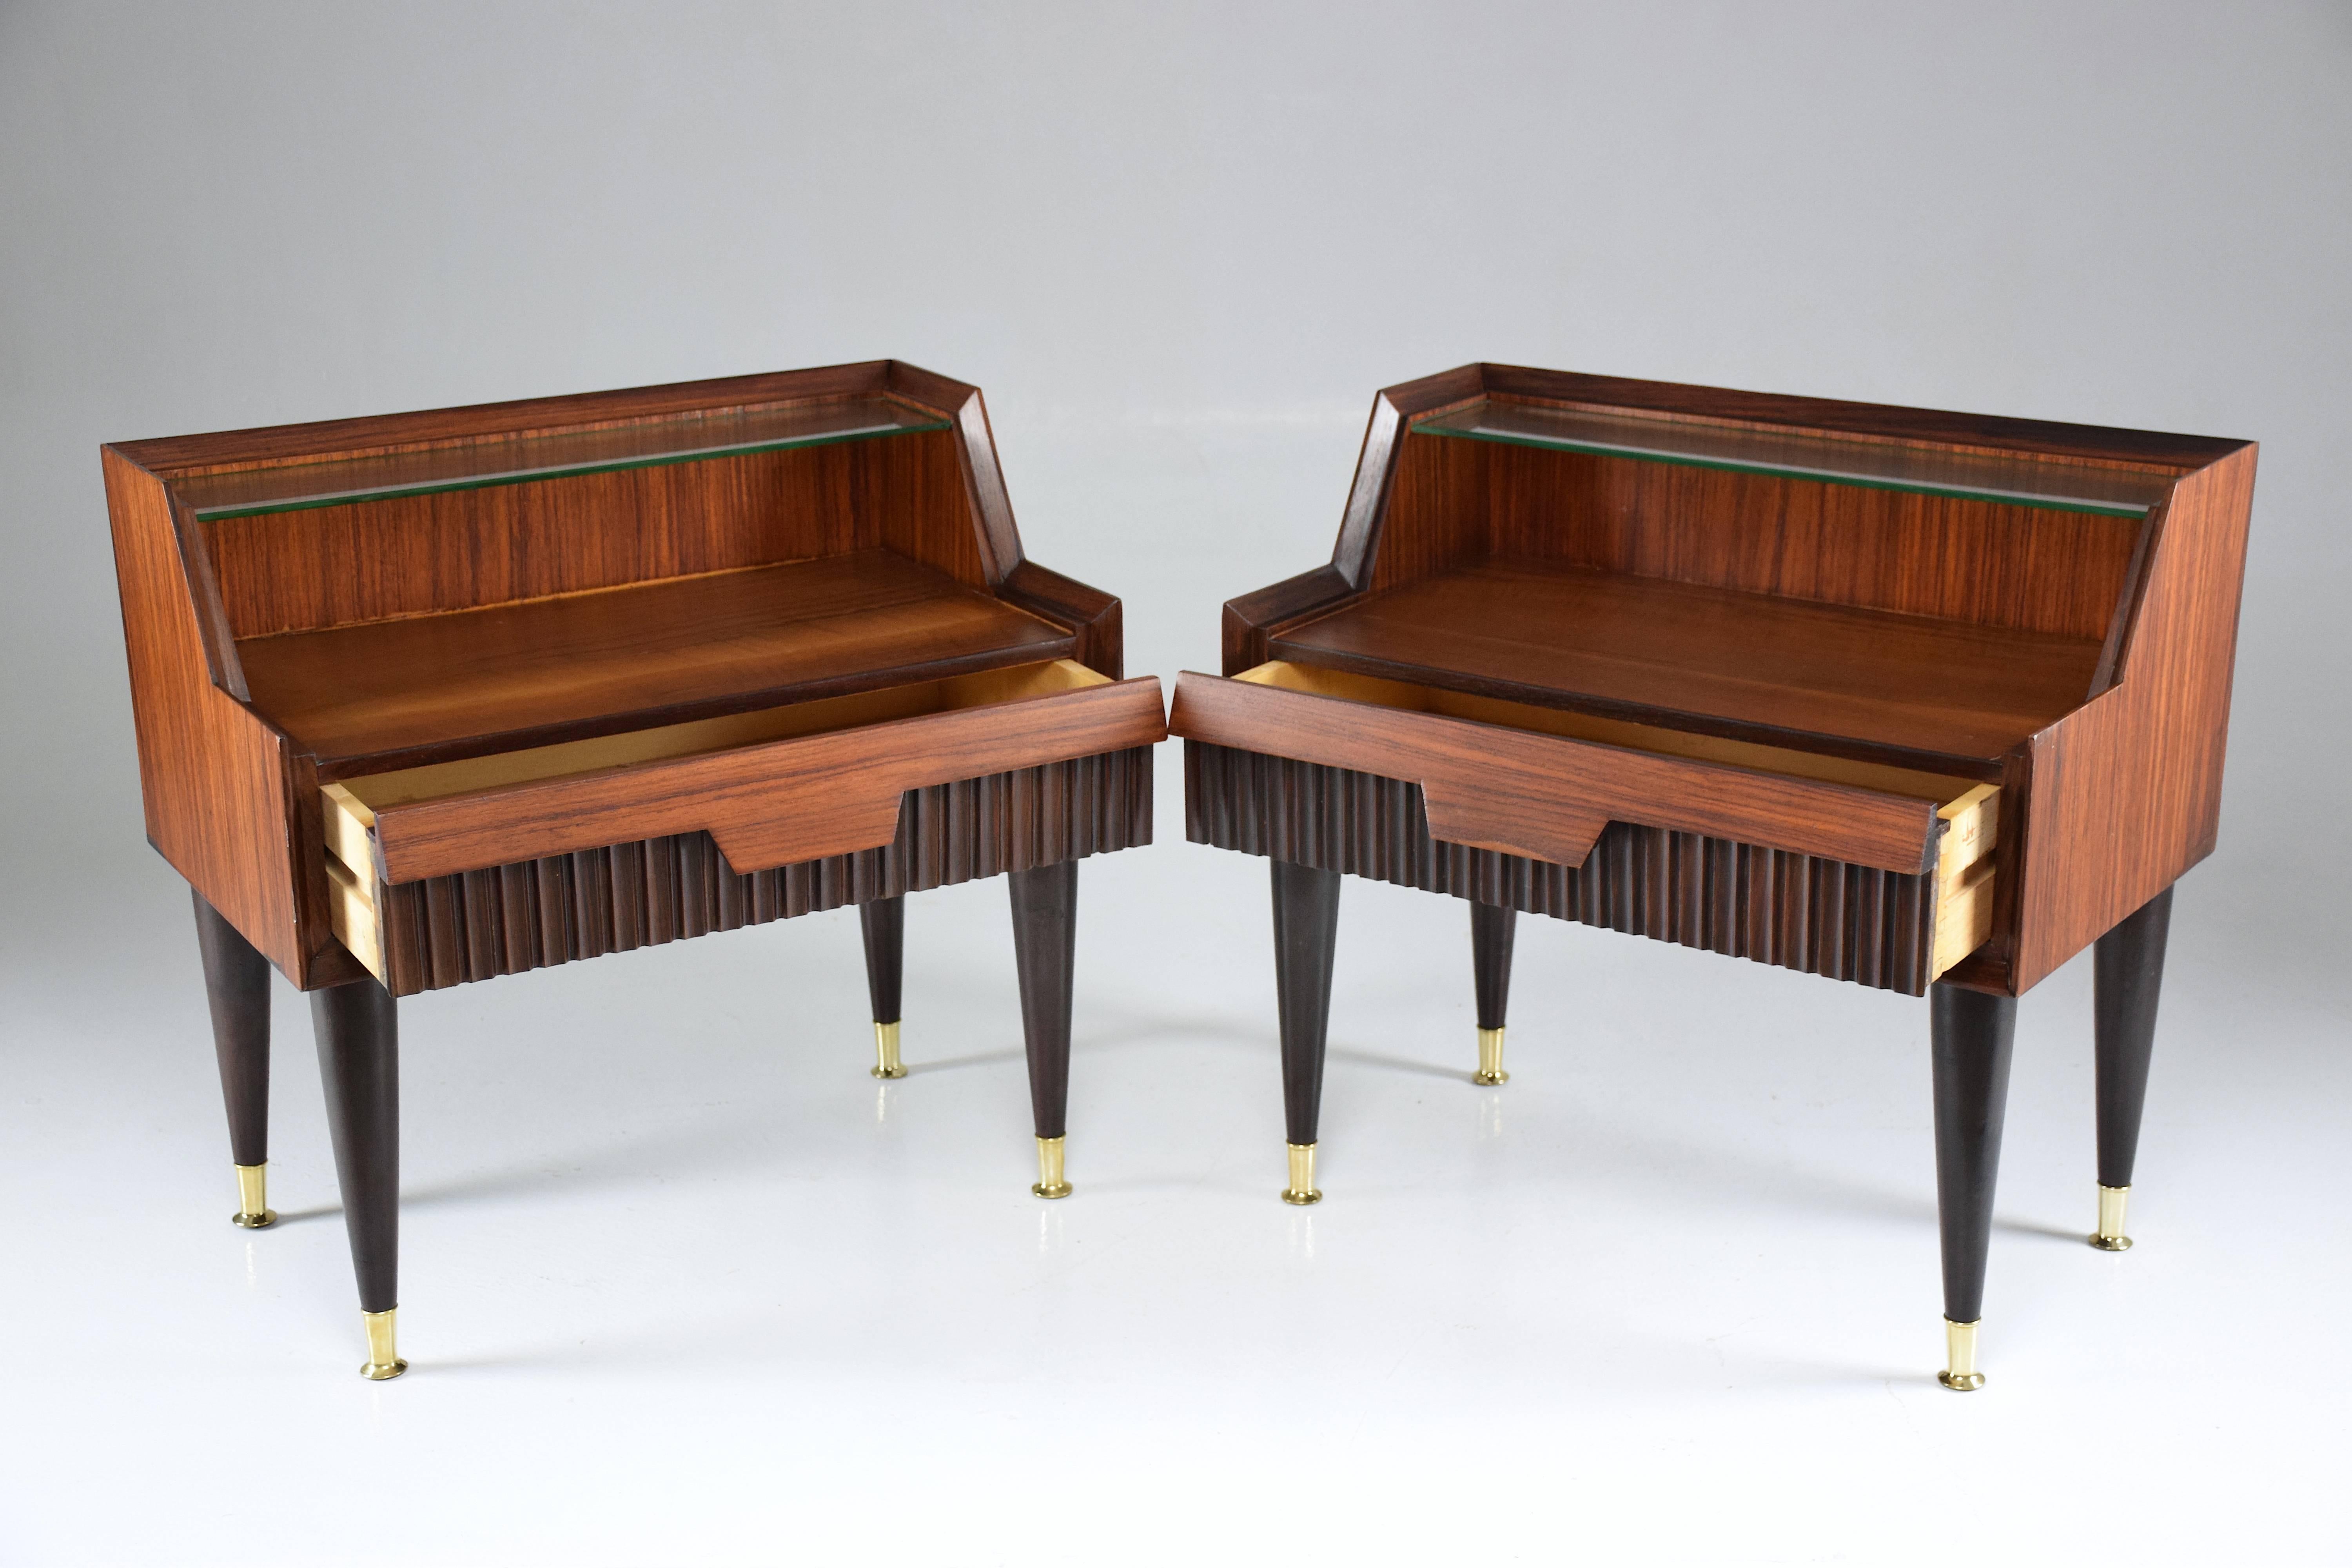 Pair of 20th century Italian vintage nightstands in fully restored condition designed in the style of a mini secretary composed of rosewood veneer, glass and polished brass endings.
These side tables are designed with a central drawer, a top glass